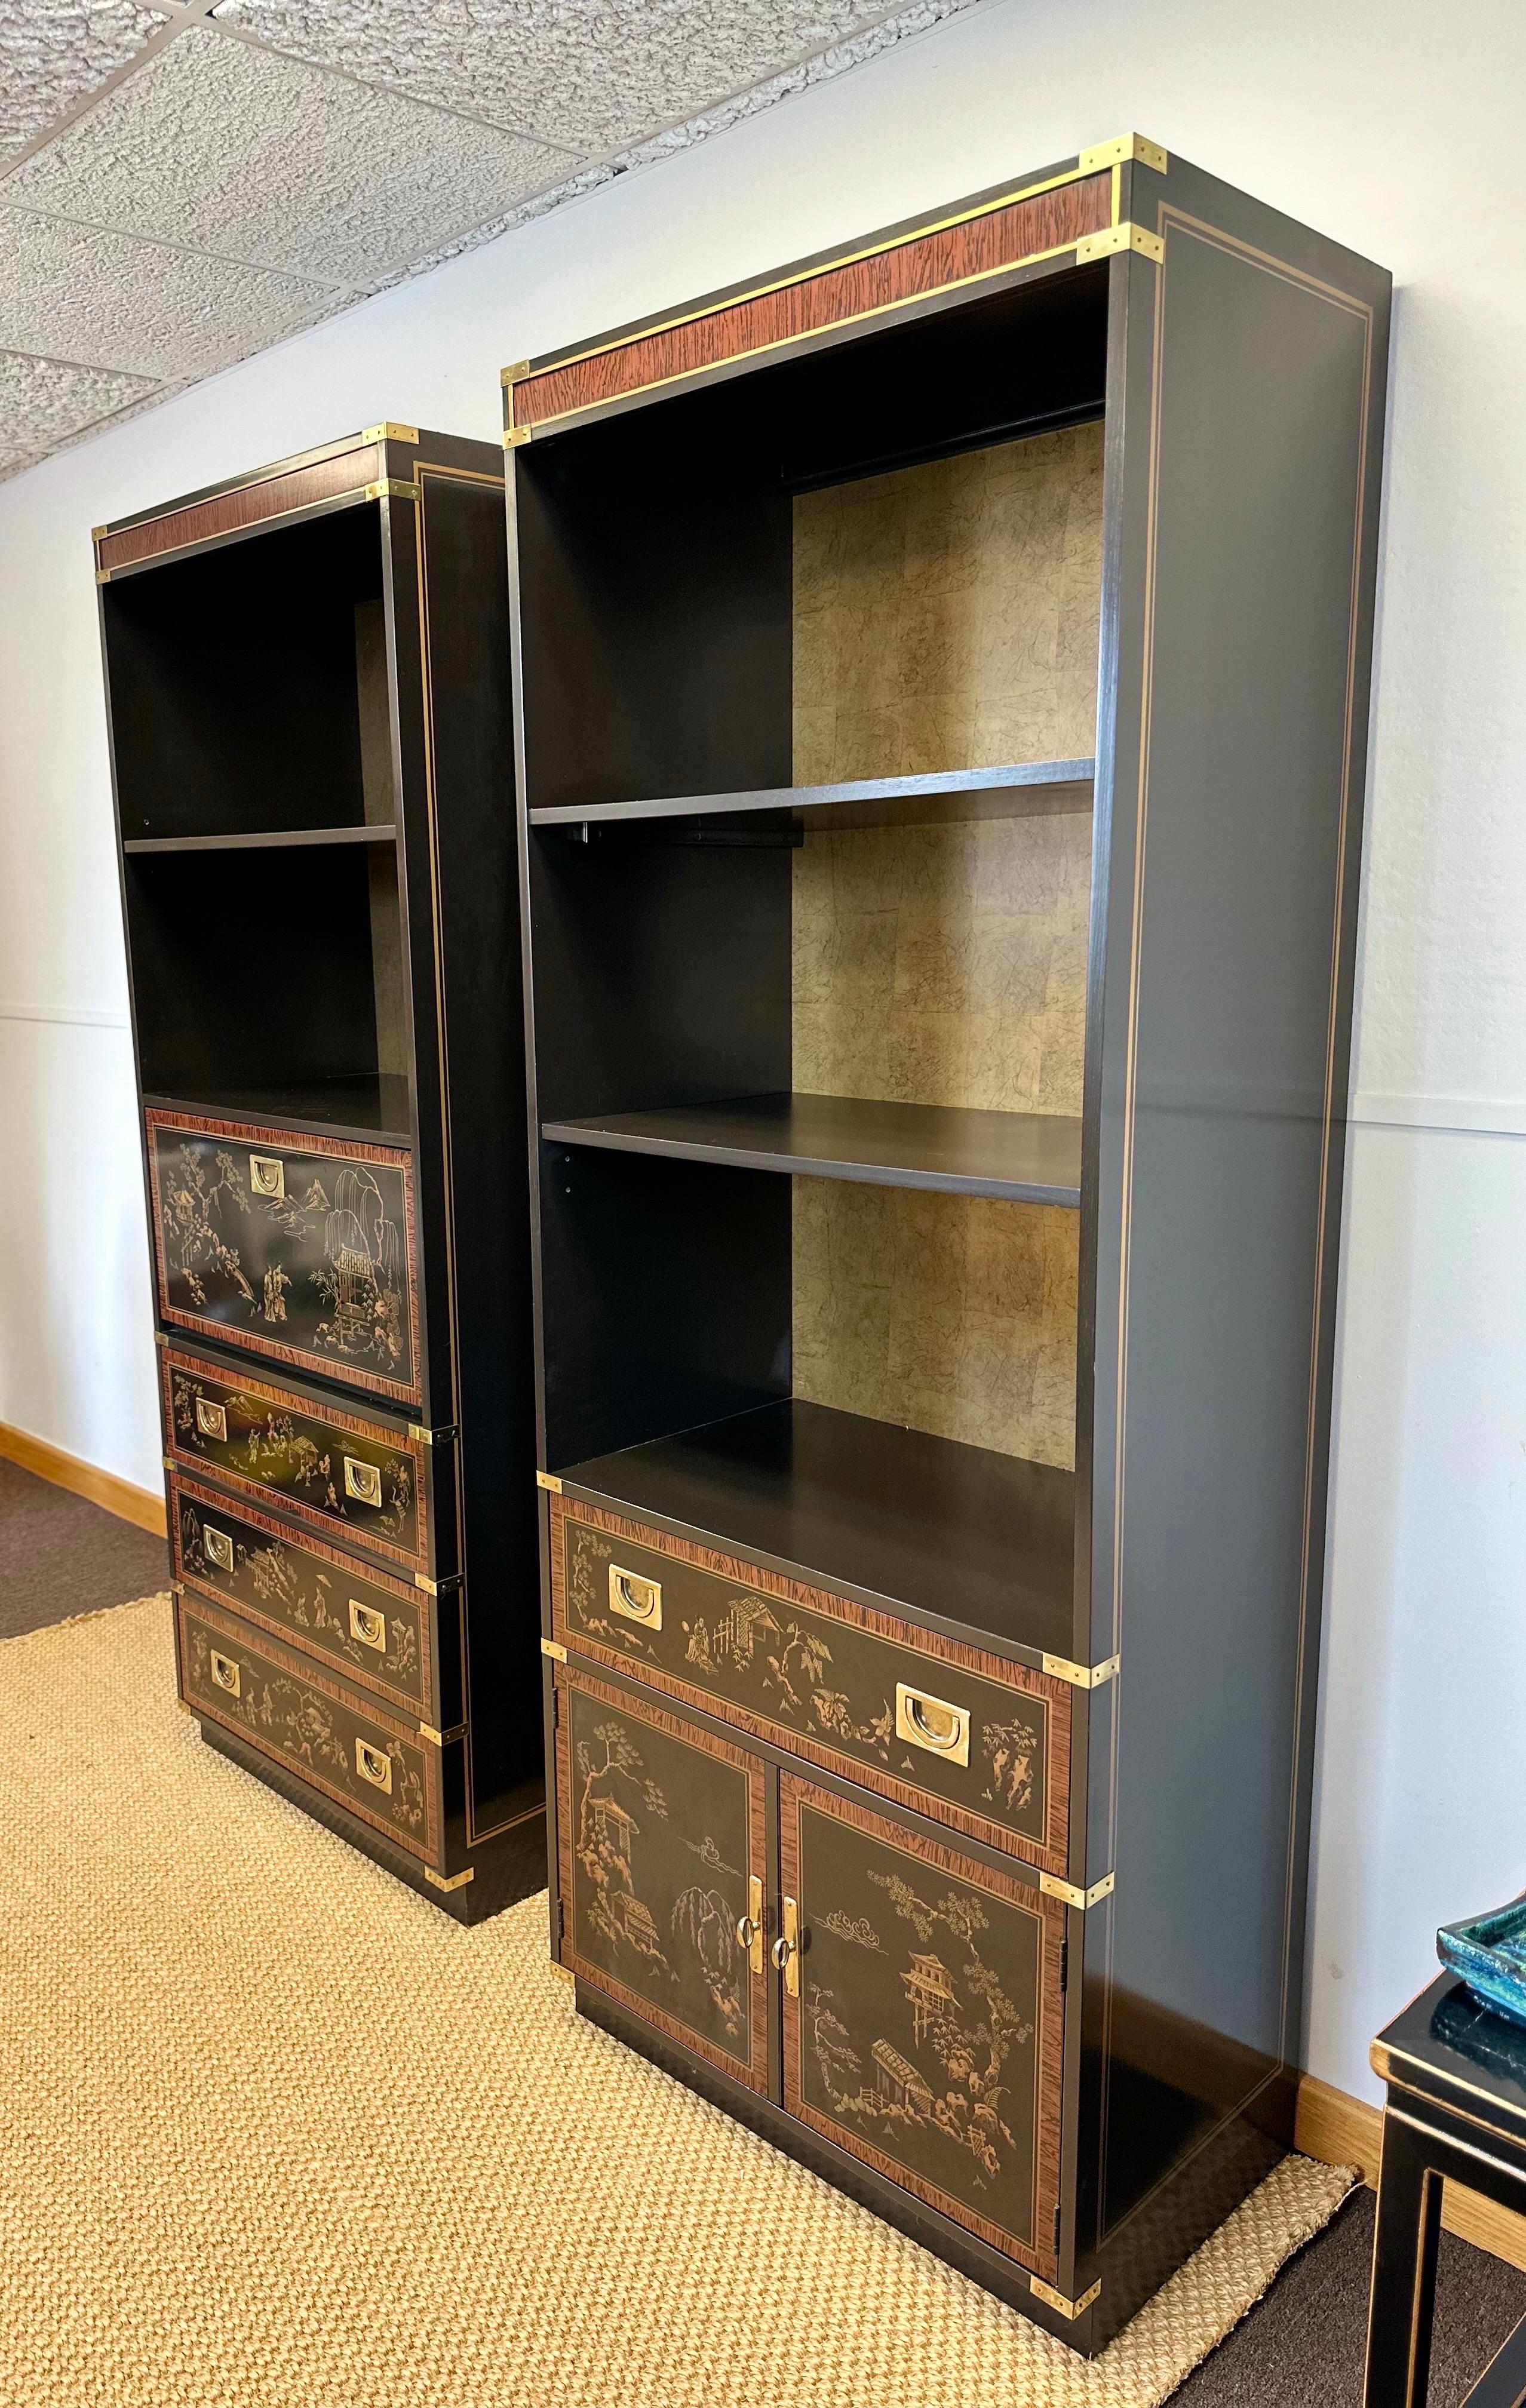 We are very pleased to offer a set of Drexel bookcases from their ET-cetera collection, circa the 1970s.  These exquisite Asian inspired bookshelves exude timeless elegance with their striking black finish that exudes a sense of refined